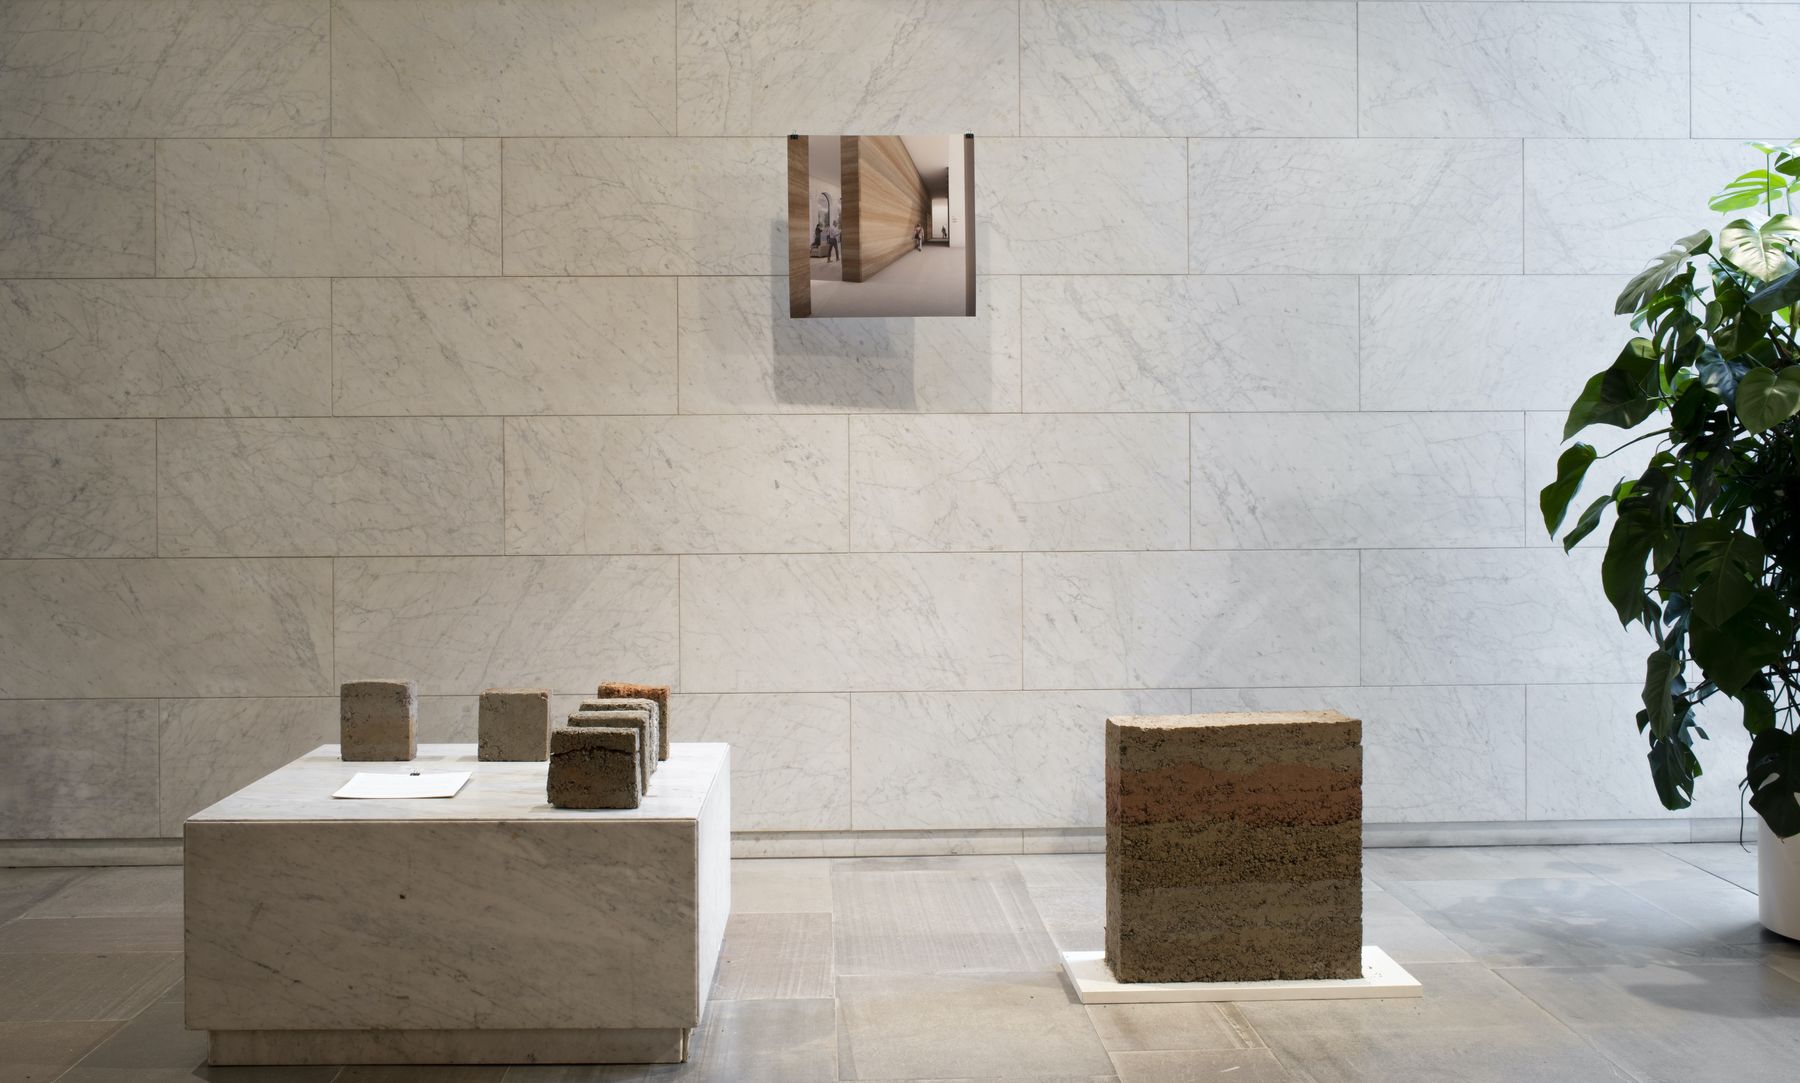 RAMMED EARTH. Paul Flanders and Lotta Harjula. Material: rammed earth with pigments